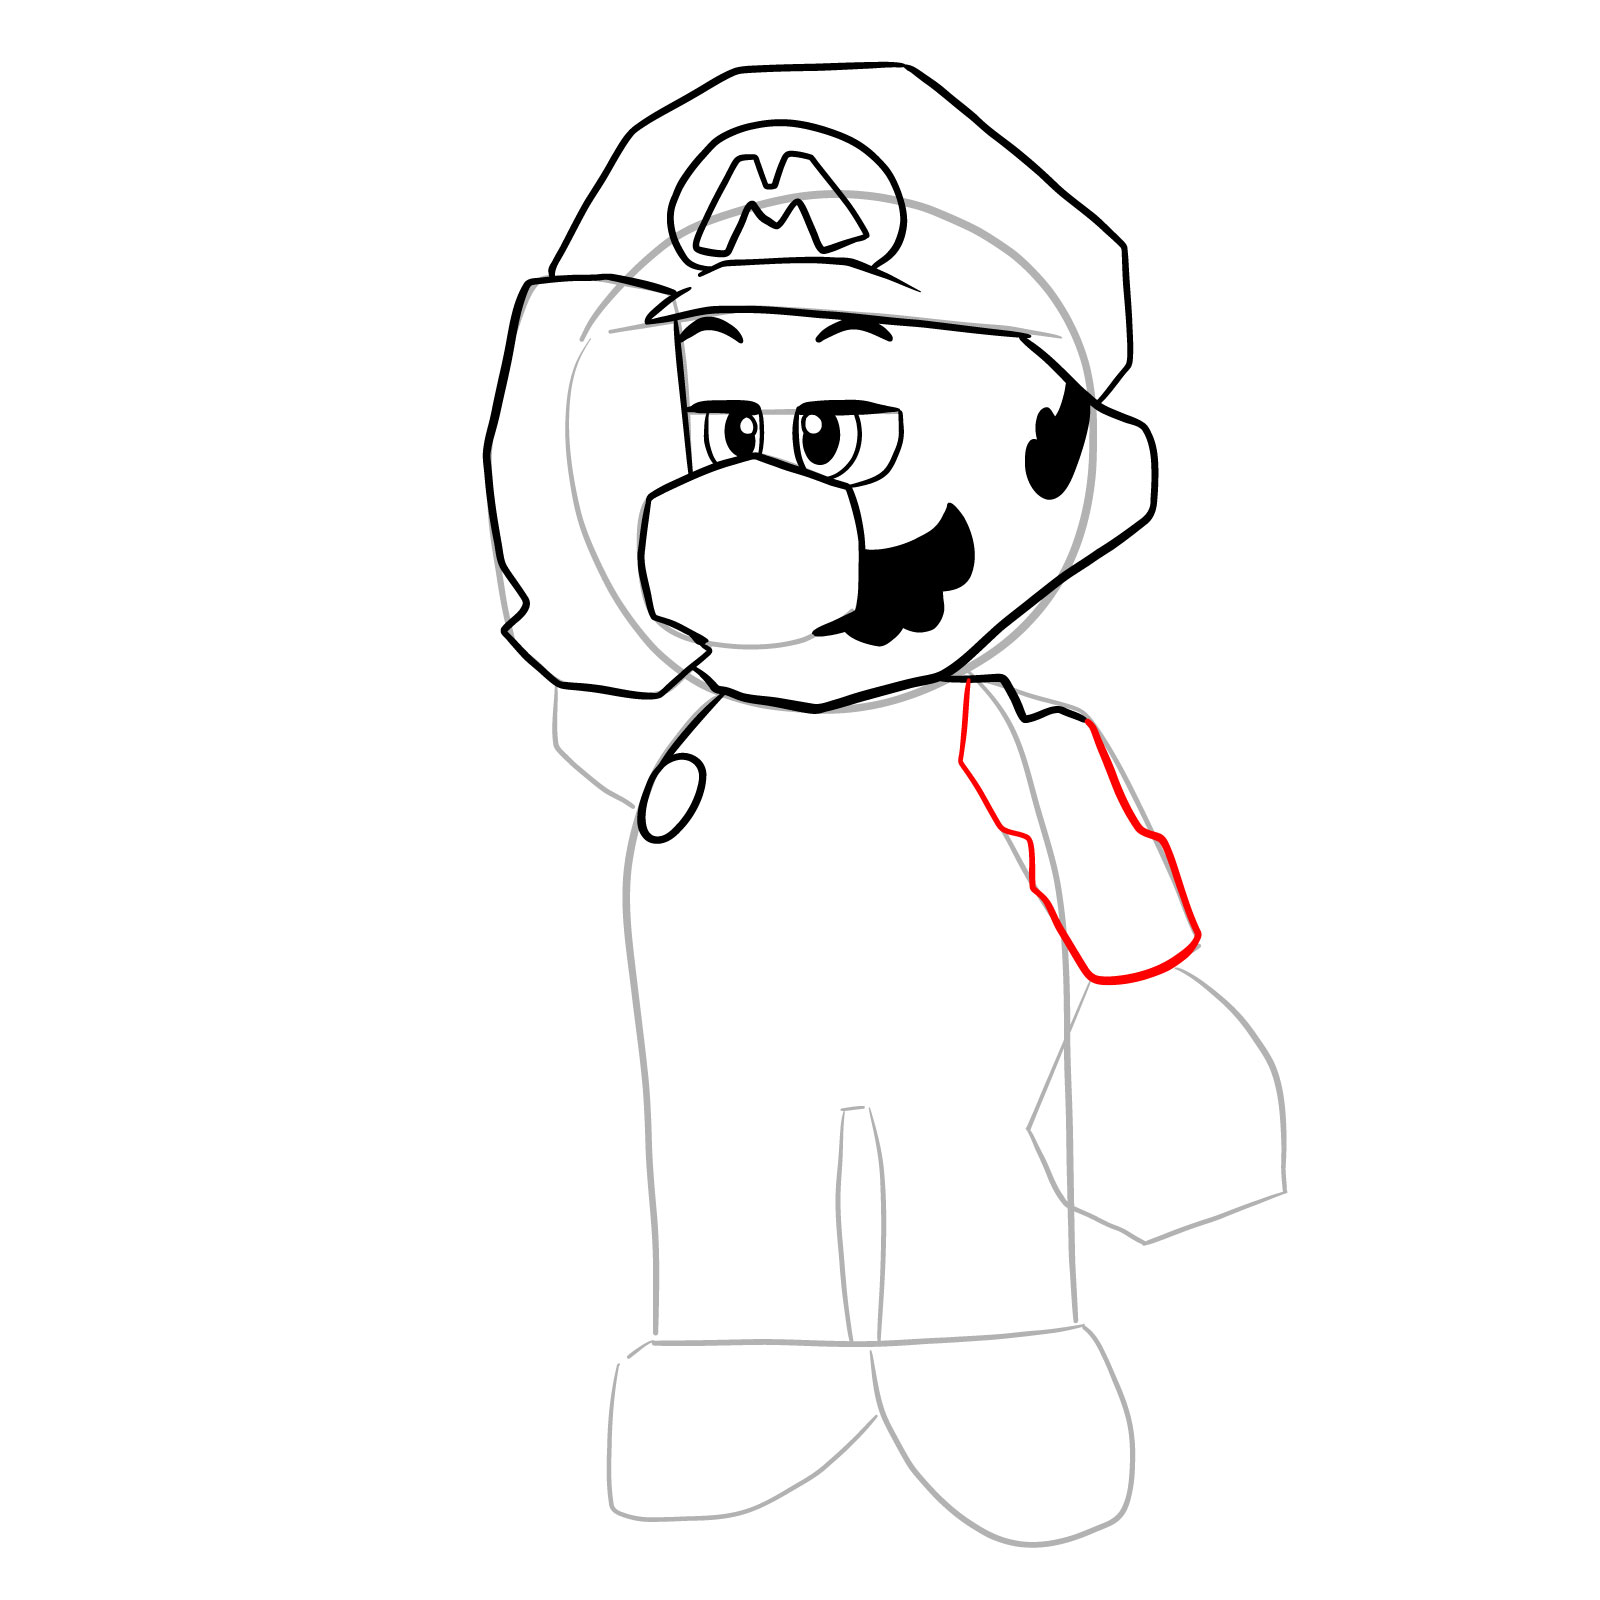 How to draw SuperMarioGlitchy4 (N64) - step 17